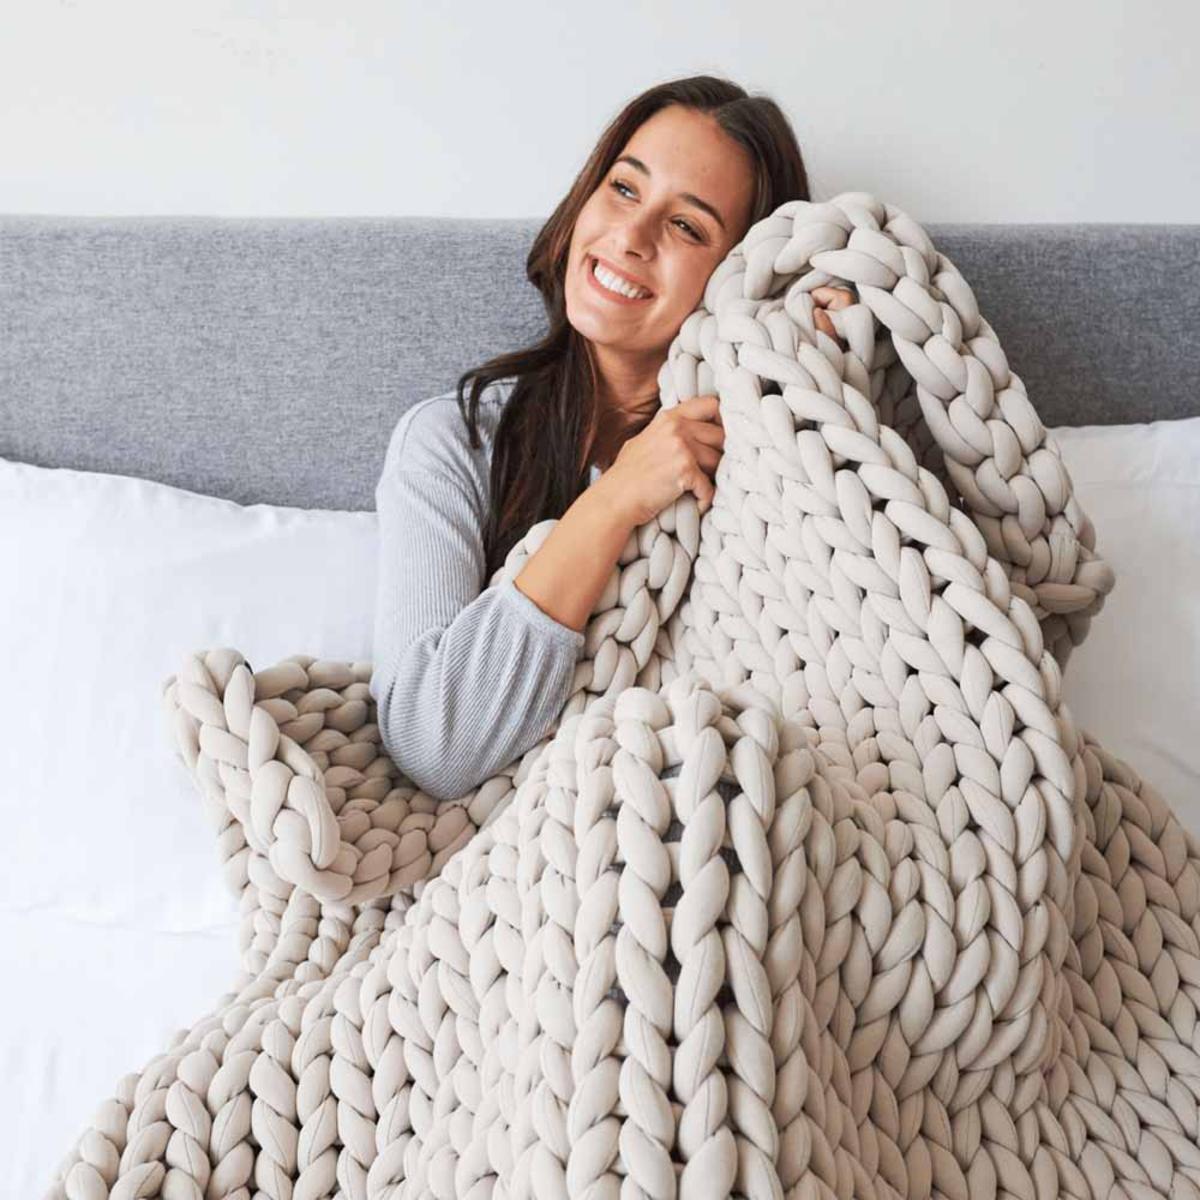 Hush 15lbs Cotton Knitted Weighted Throw Blanket